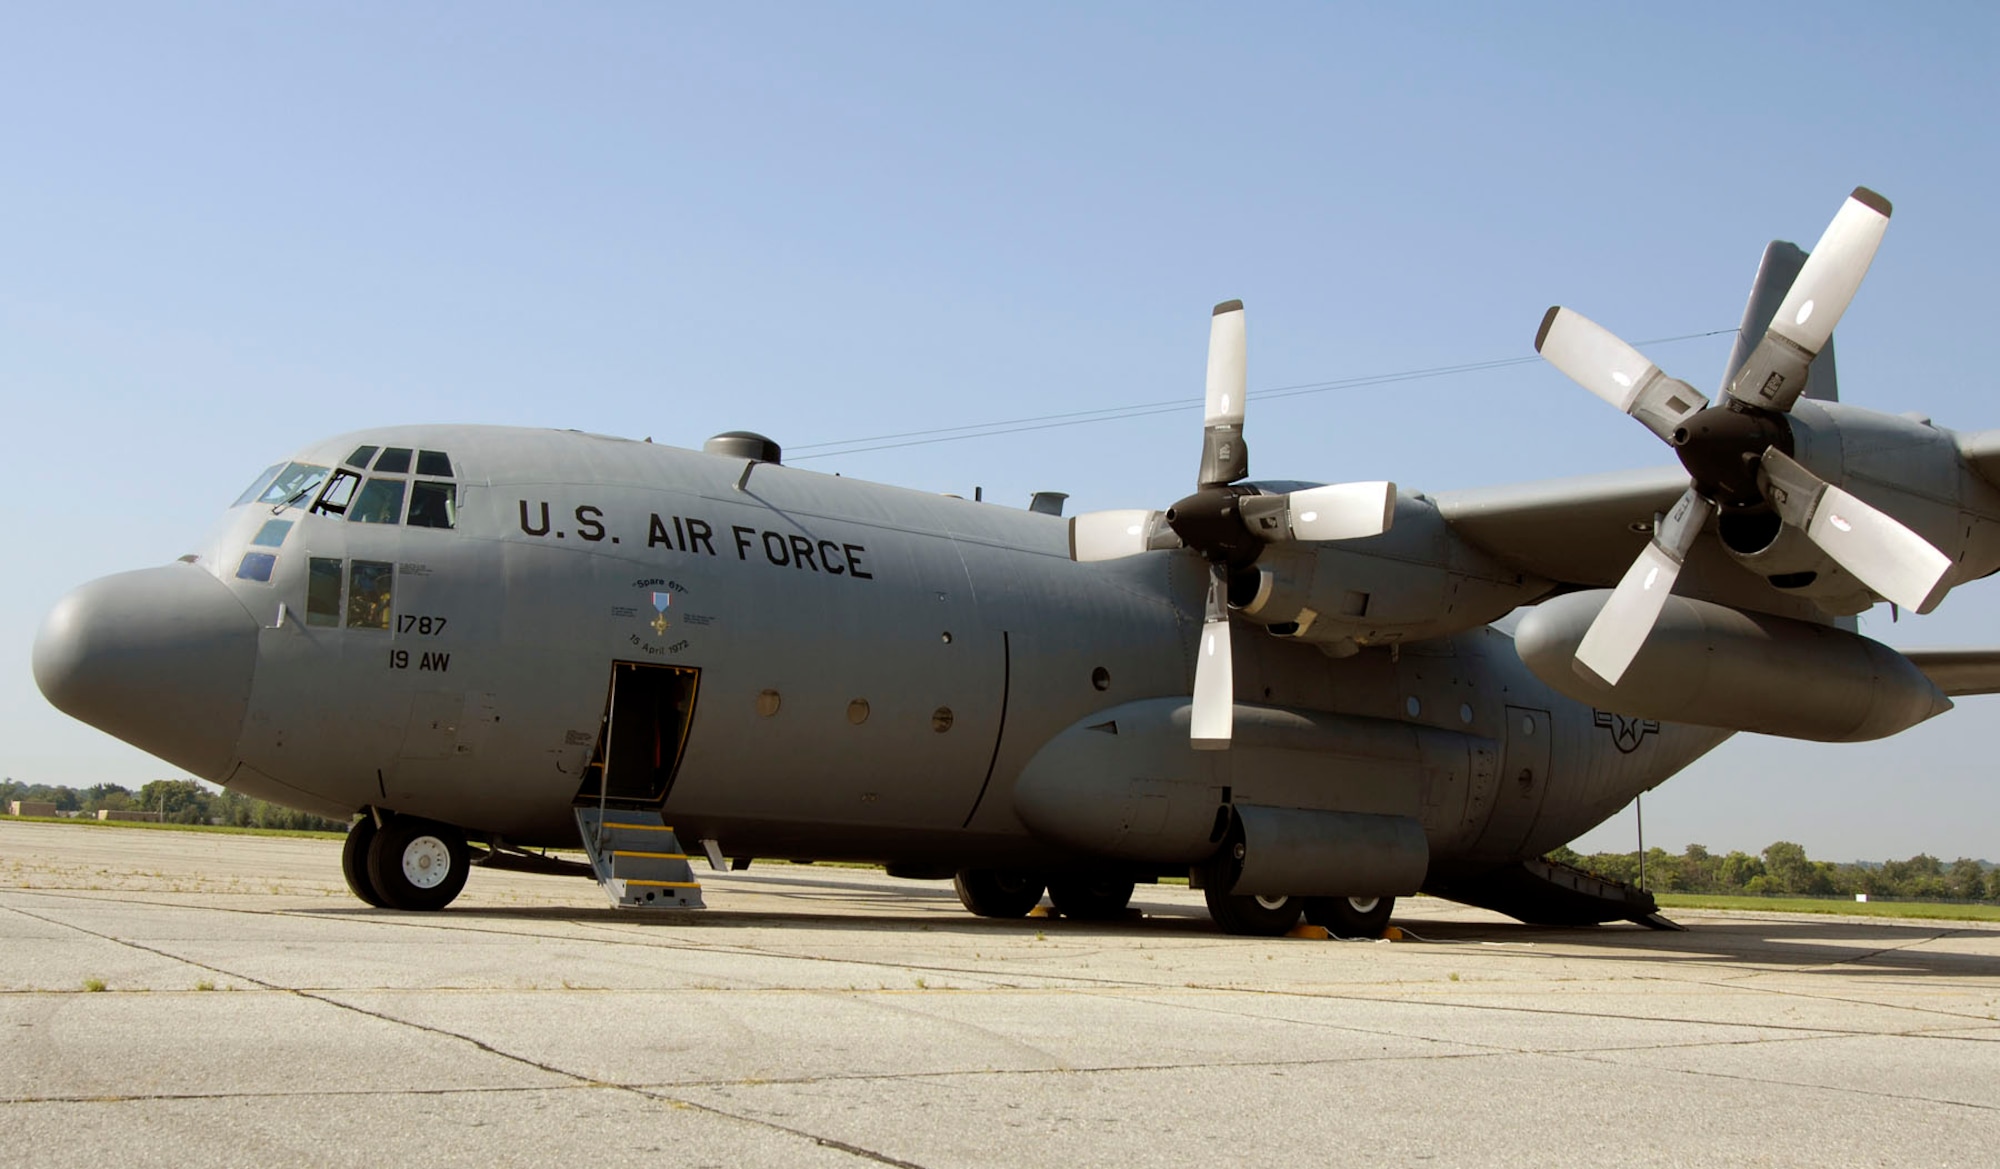 DAYTON, Ohio -- The C-130E SPARE 617 arrives at the National Museum of the U.S. Air Force after its final flight on Aug. 18, 2011. Not only is this C-130E (S/N 62-1787) representative of all C-130 transport aircraft, it also performed courageous work during the Southeast Asia War. Two members of its crew – Capt. William Caldwell, pilot, and Tech. Sgt. Charlie Shaub, loadmaster – were awarded Air Force Crosses, the U.S. Air Force’s second highest award for valor, for their heroic actions during the siege of An Loc in 1972. (U.S. Air Force photo by Michelle Gigante)